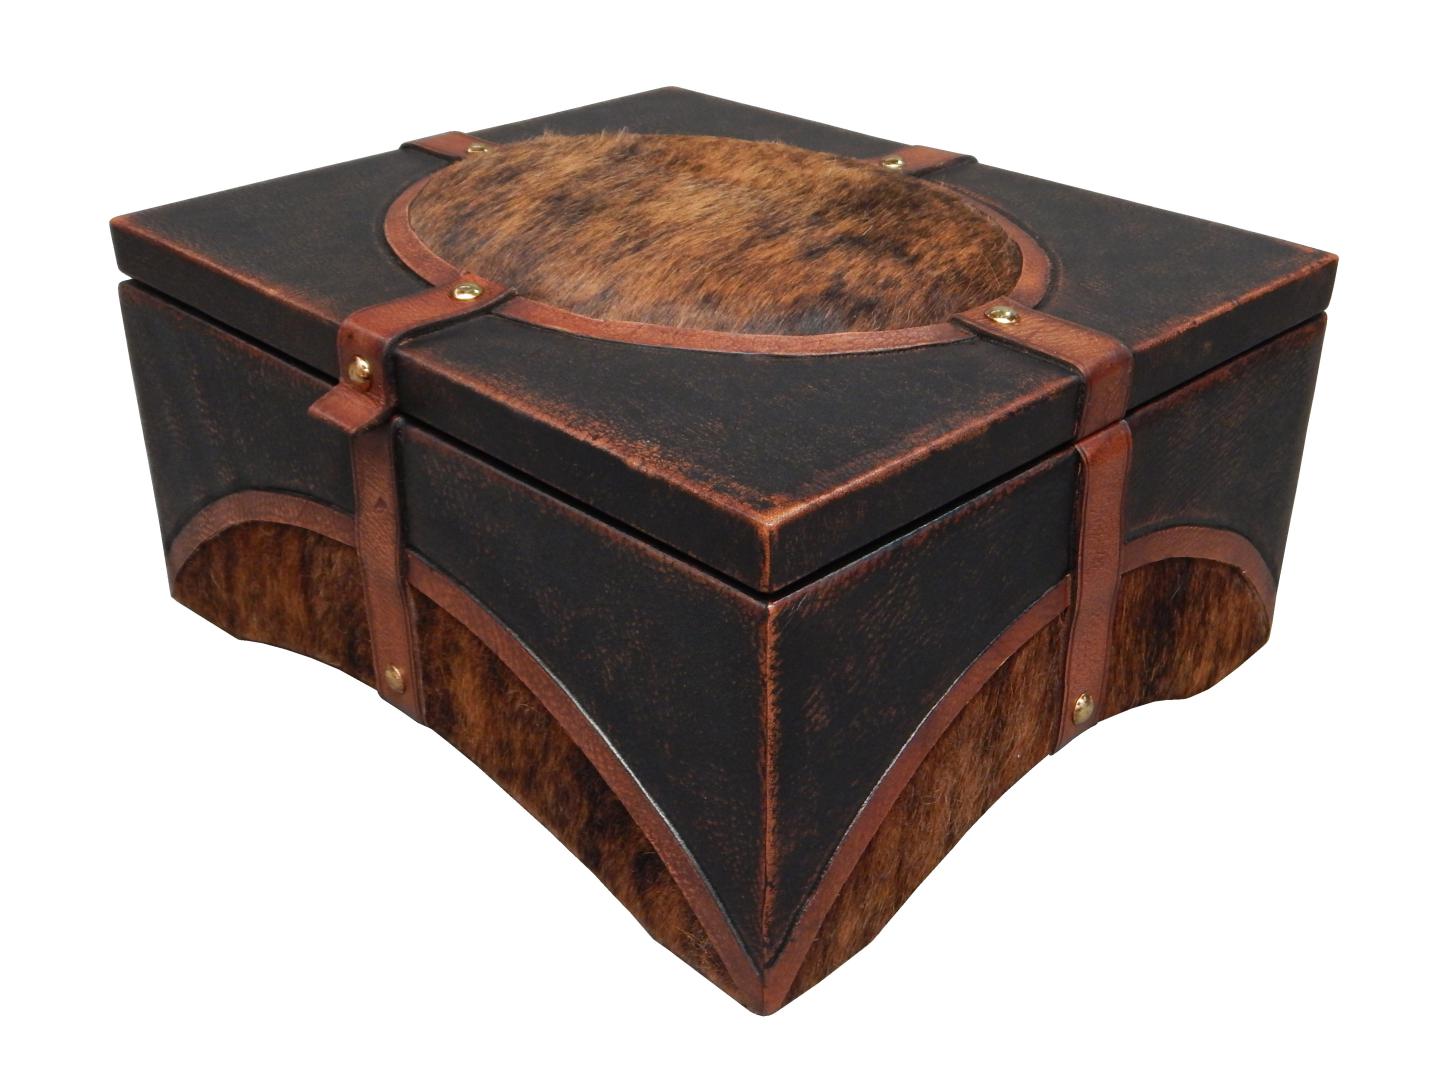 leather box with a cowhide hair real brindle color and belts